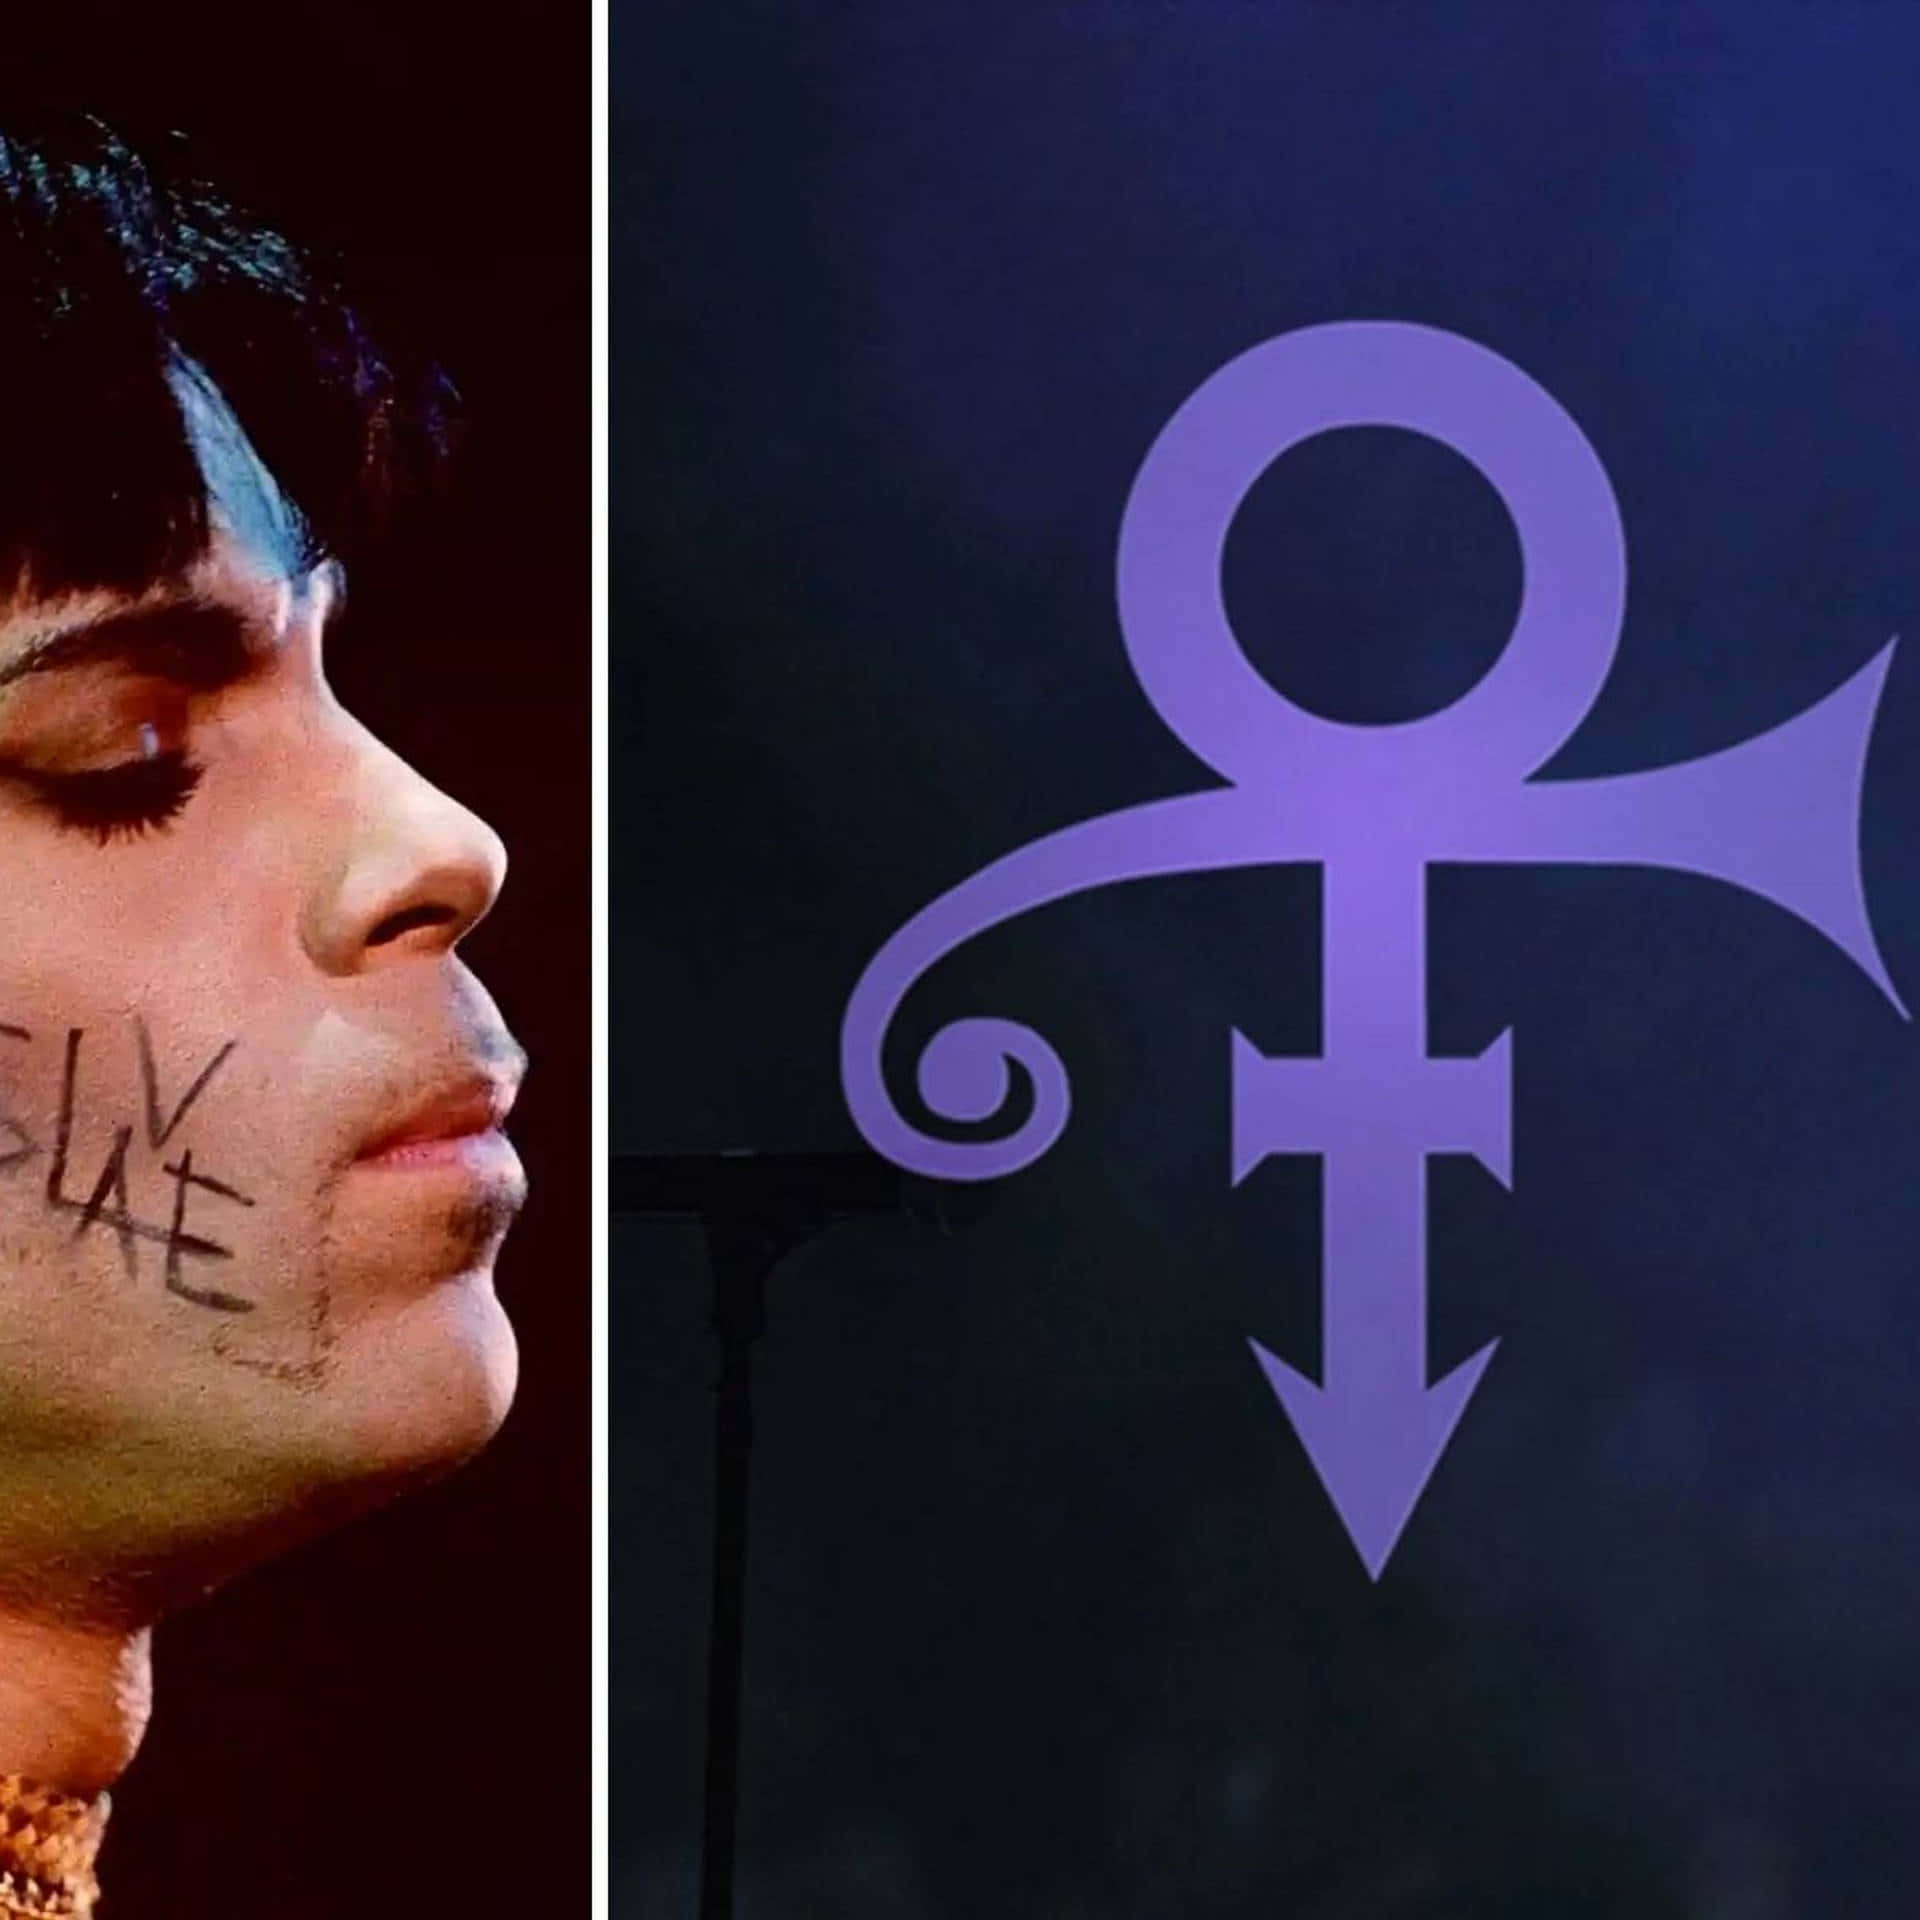 The Iconic Artist, Prince